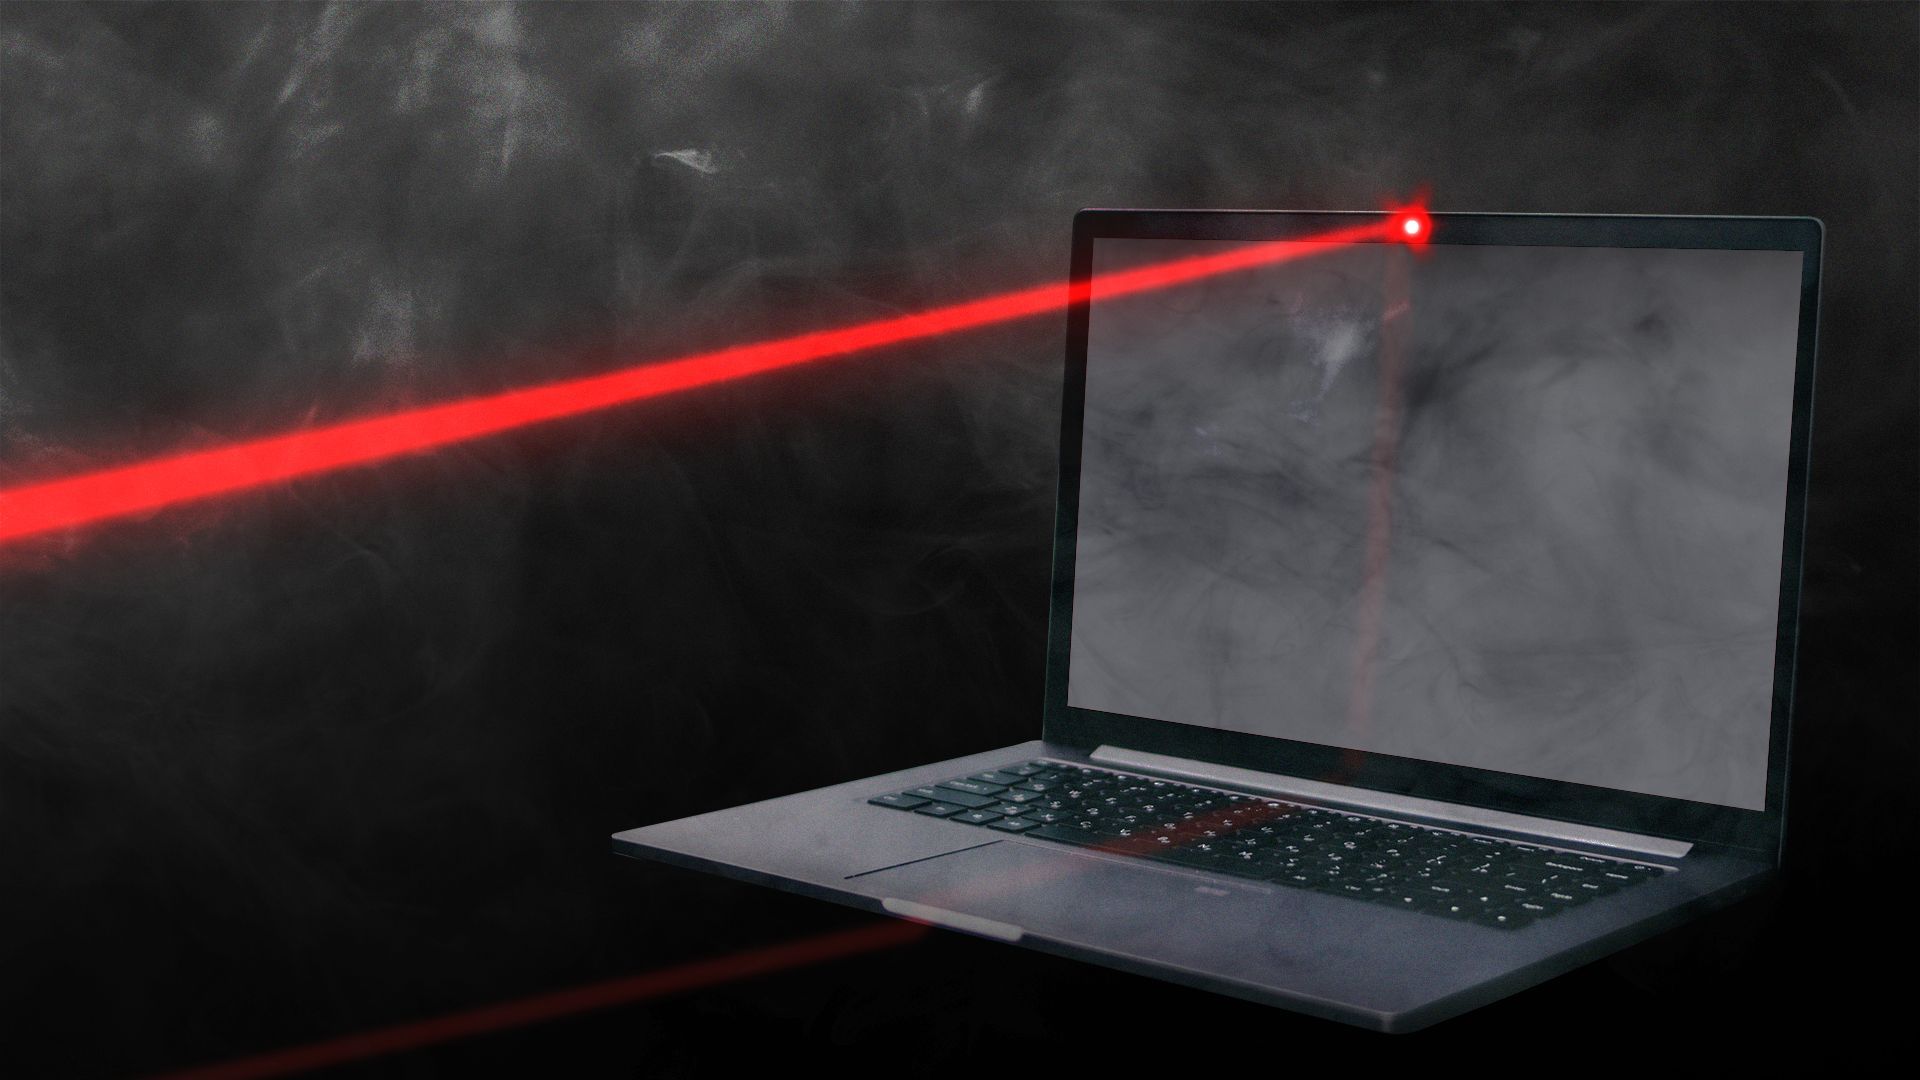 Illustration of a laptop with a laser beam extending from the camera, resembling a gun's laser sight